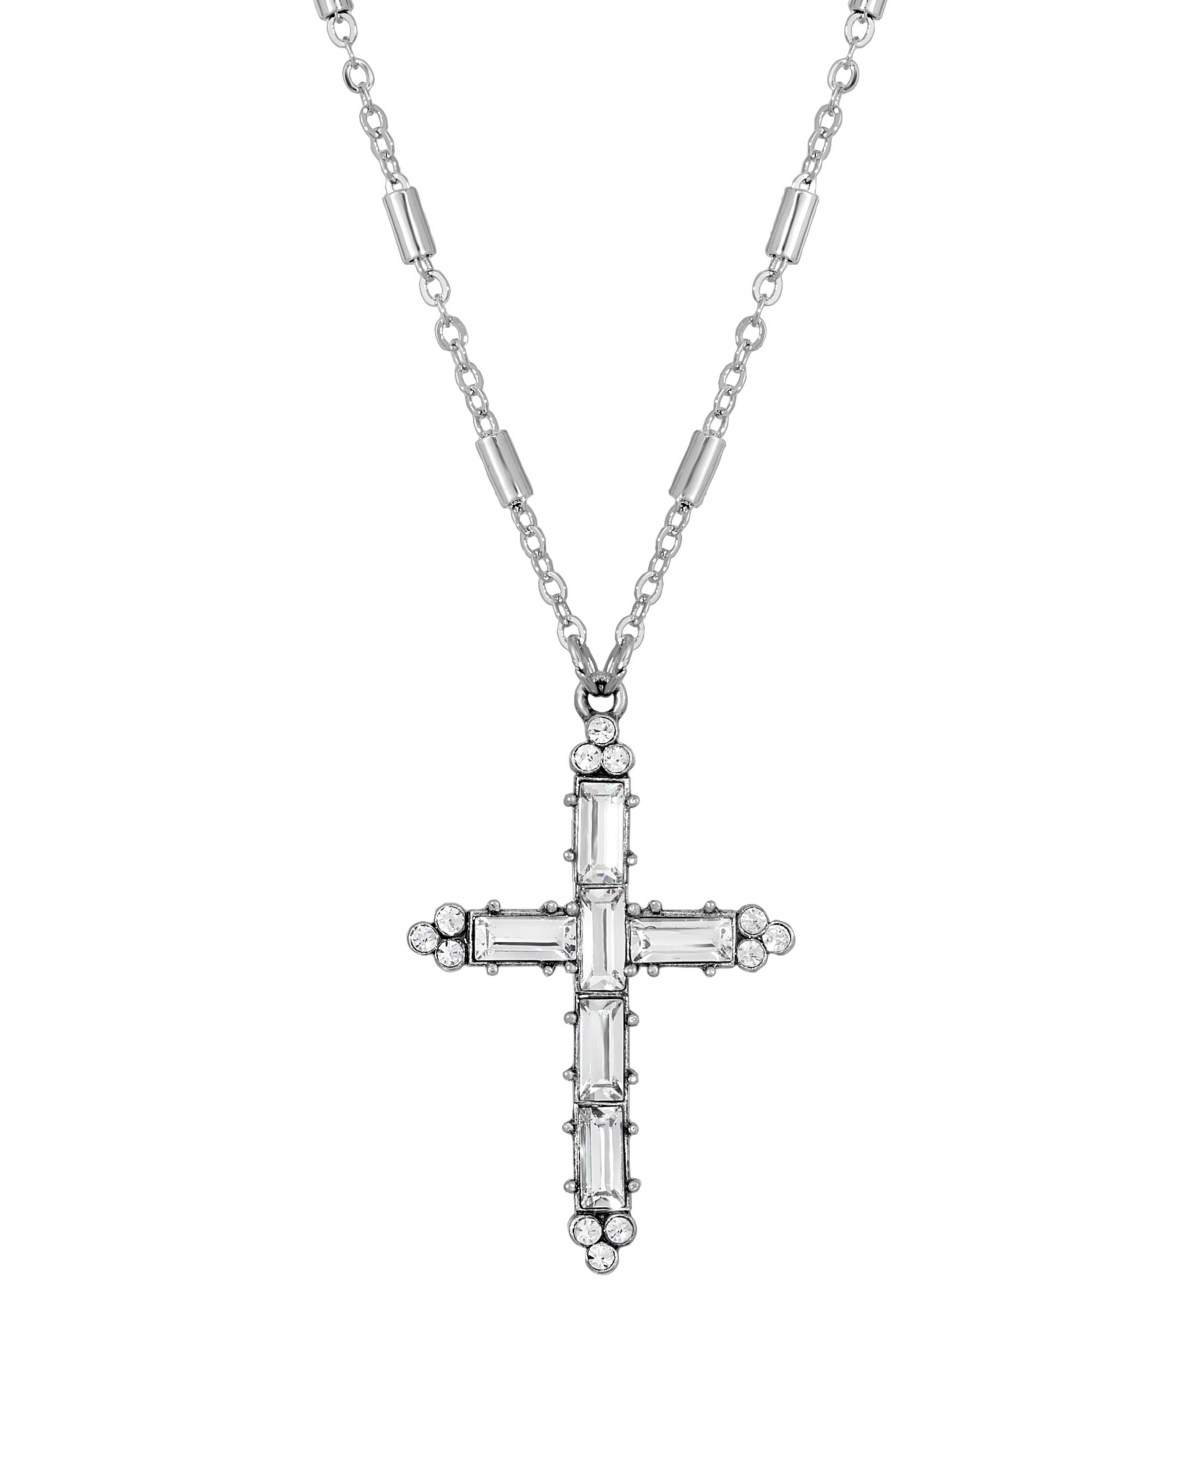 Pewter Crystal Cross Silver-Tone Chain Necklace - White